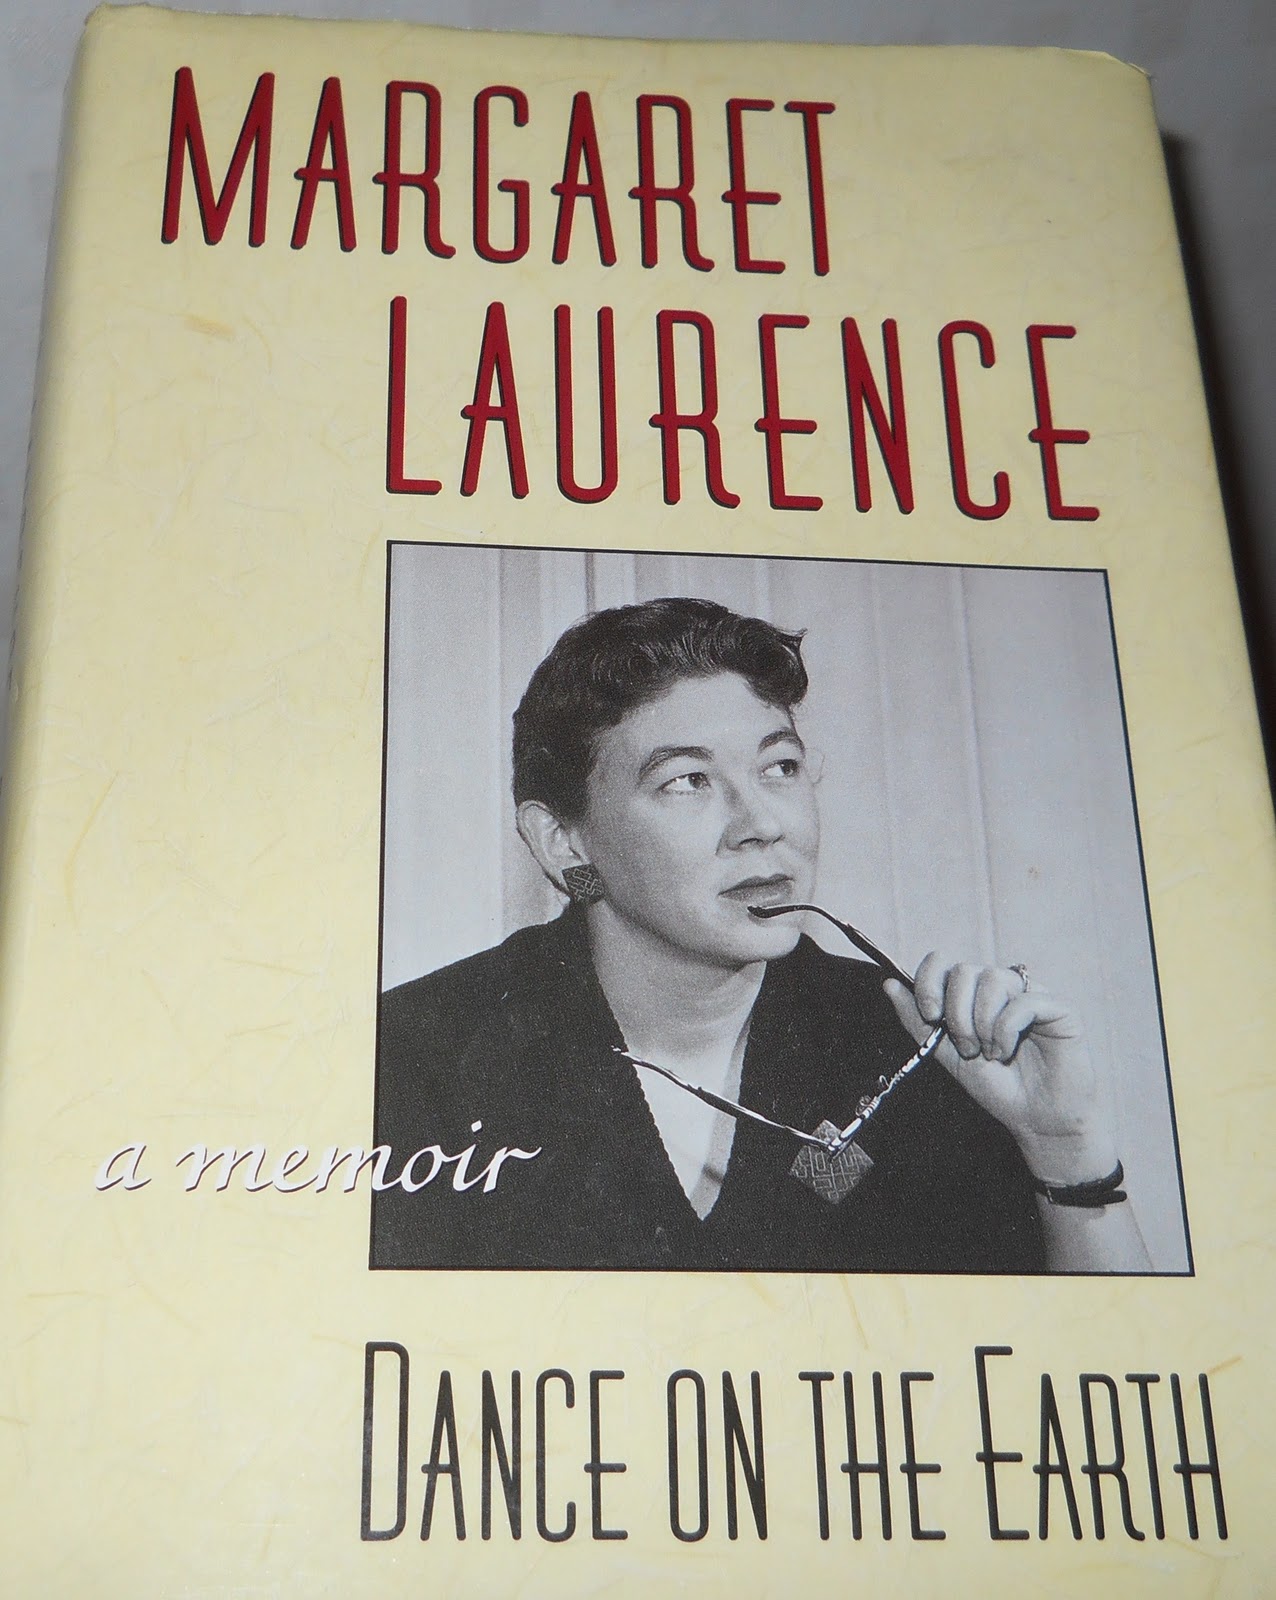 The loons Margaret Laurence was one of the grea